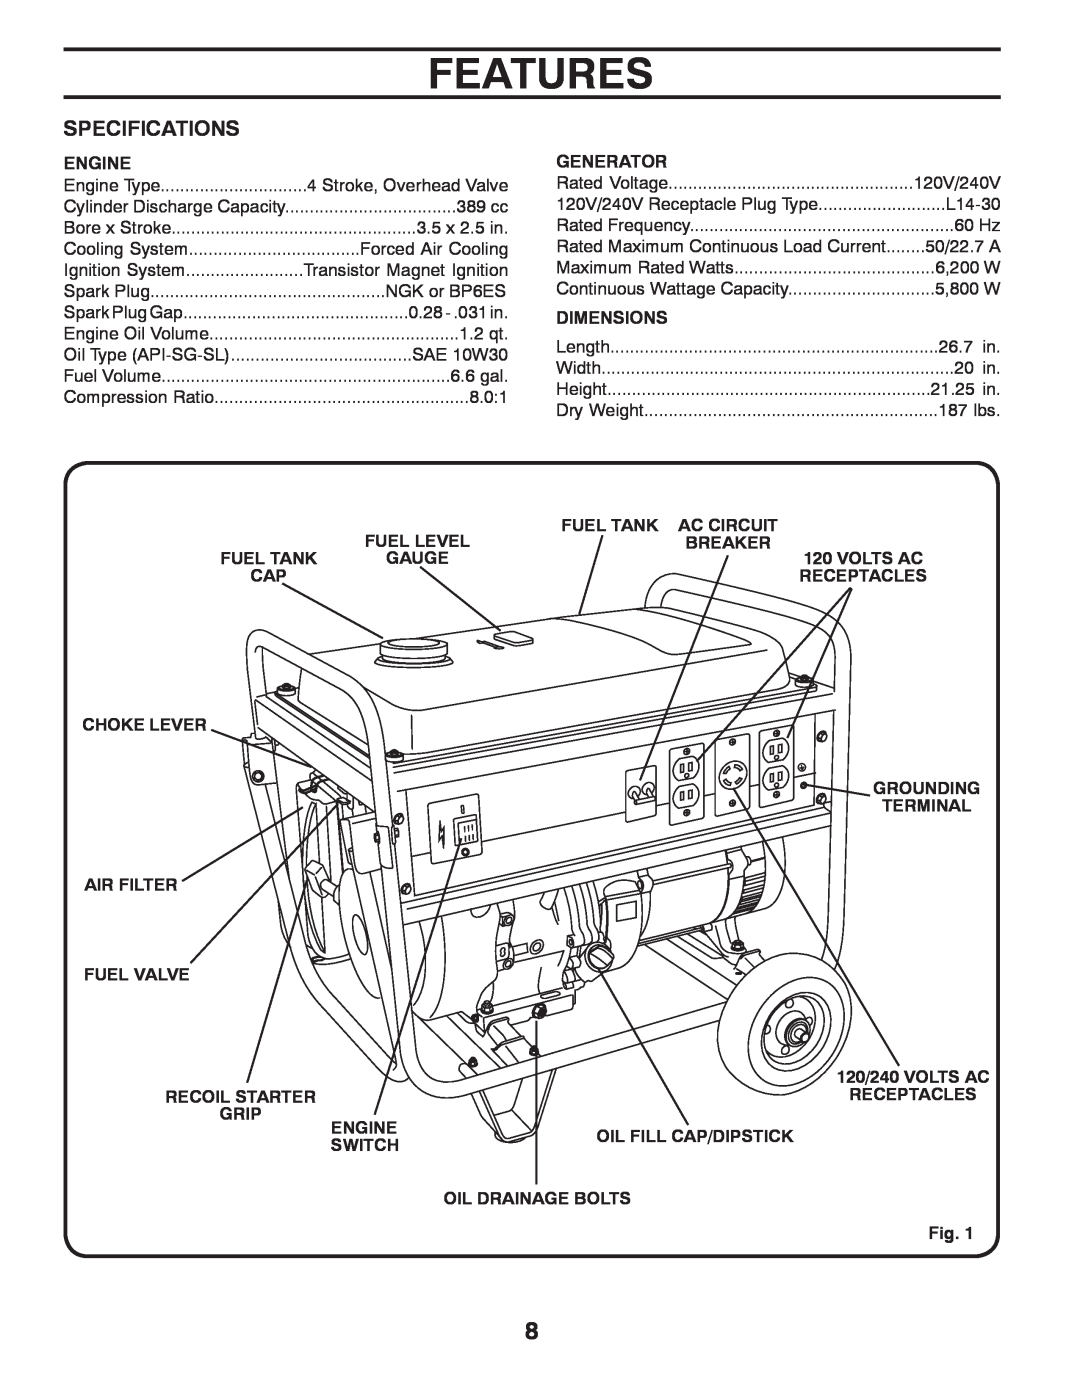 Poulan 420077 owner manual Features, Specifications 